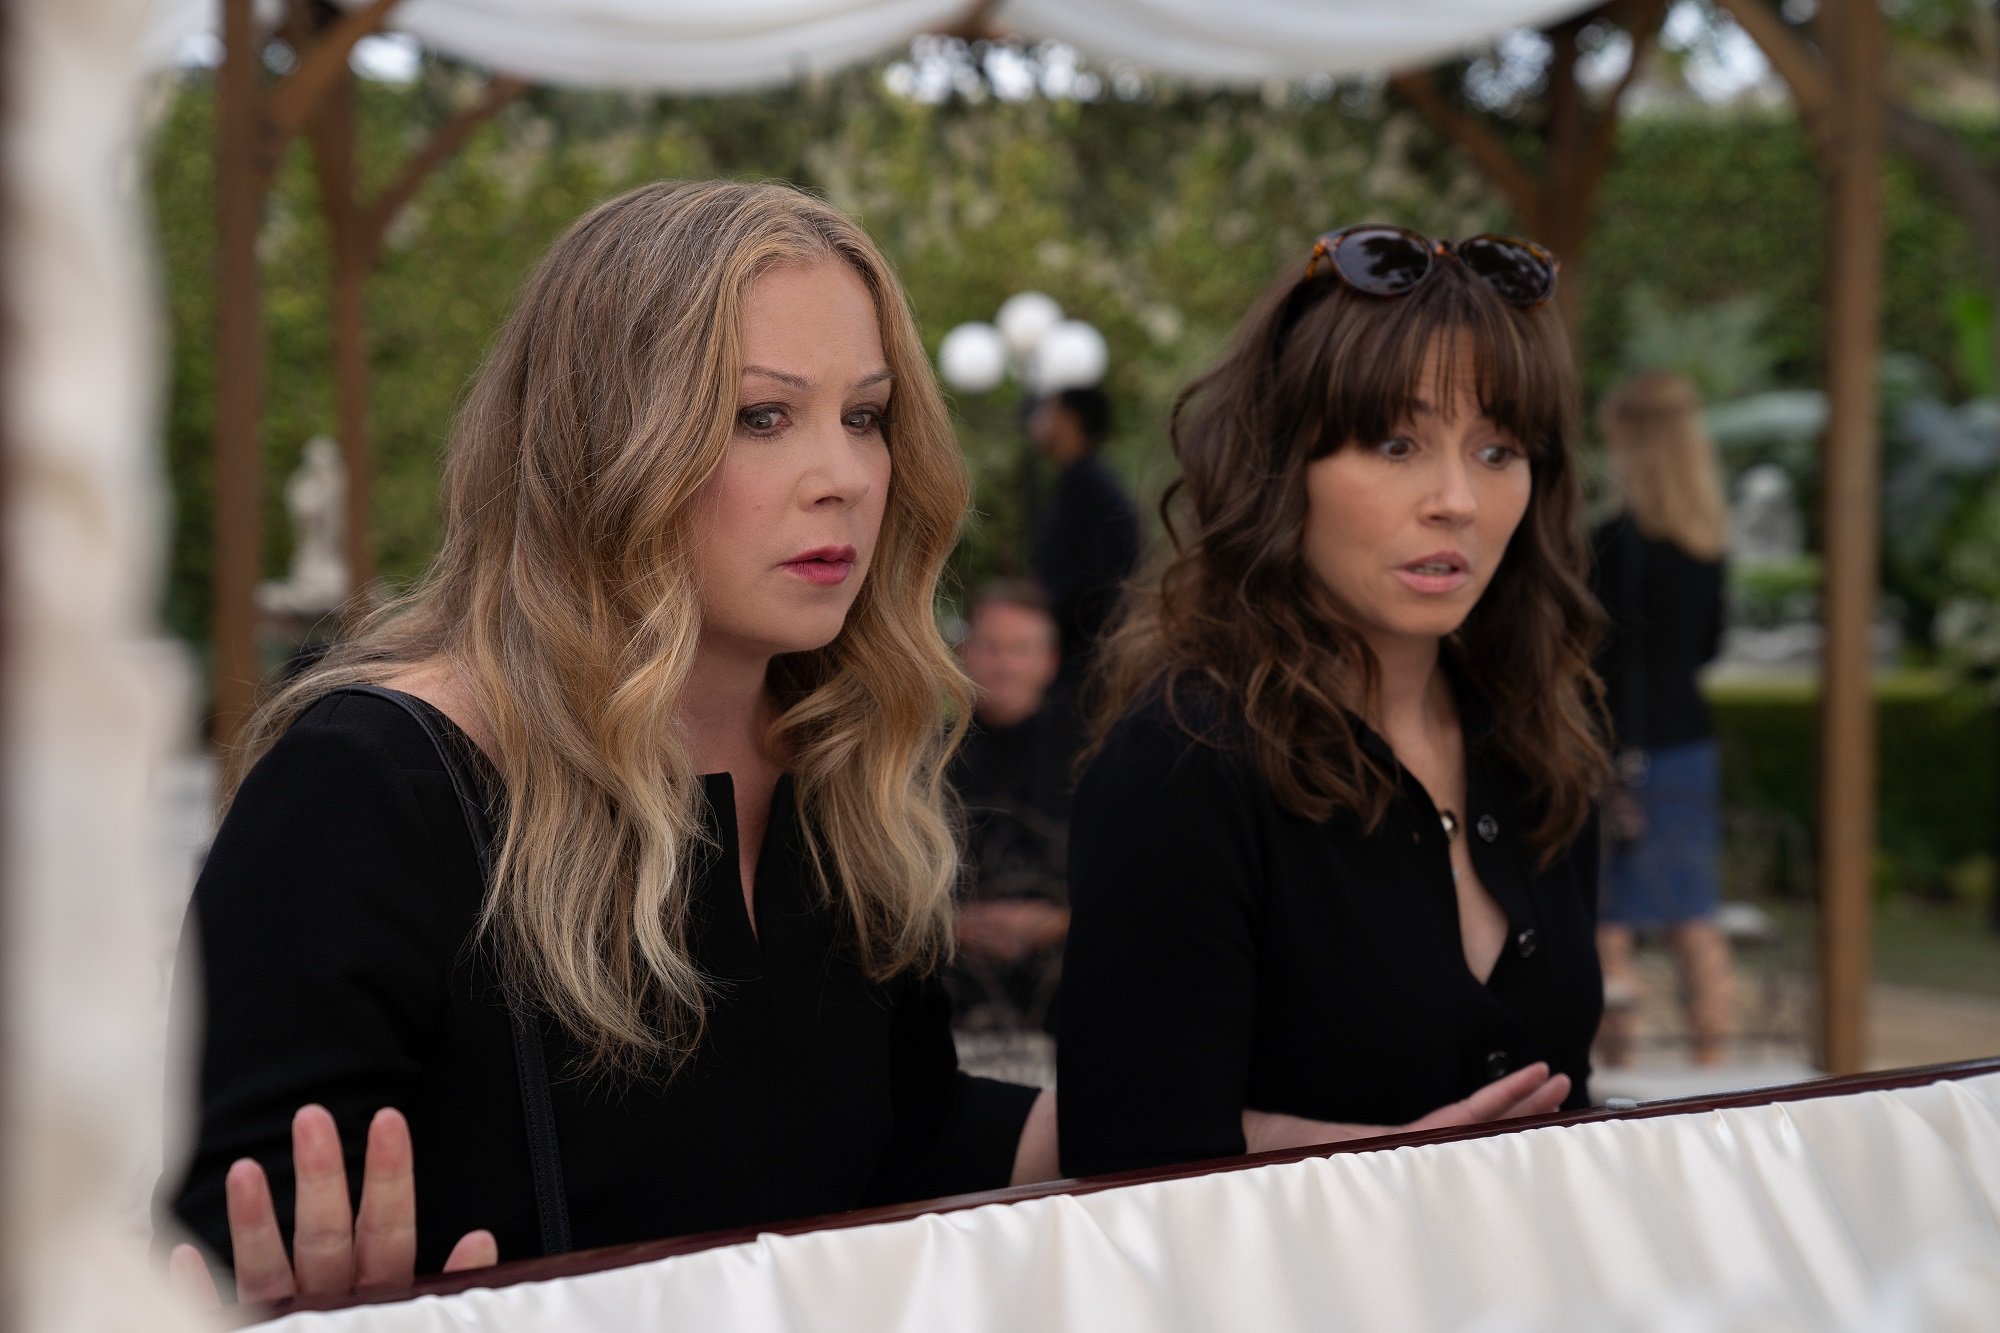 'Dead to Me' Season 3: Christina Applegate as Jen Harding and Linda Cardellini as Judy Hale looking in shock at something